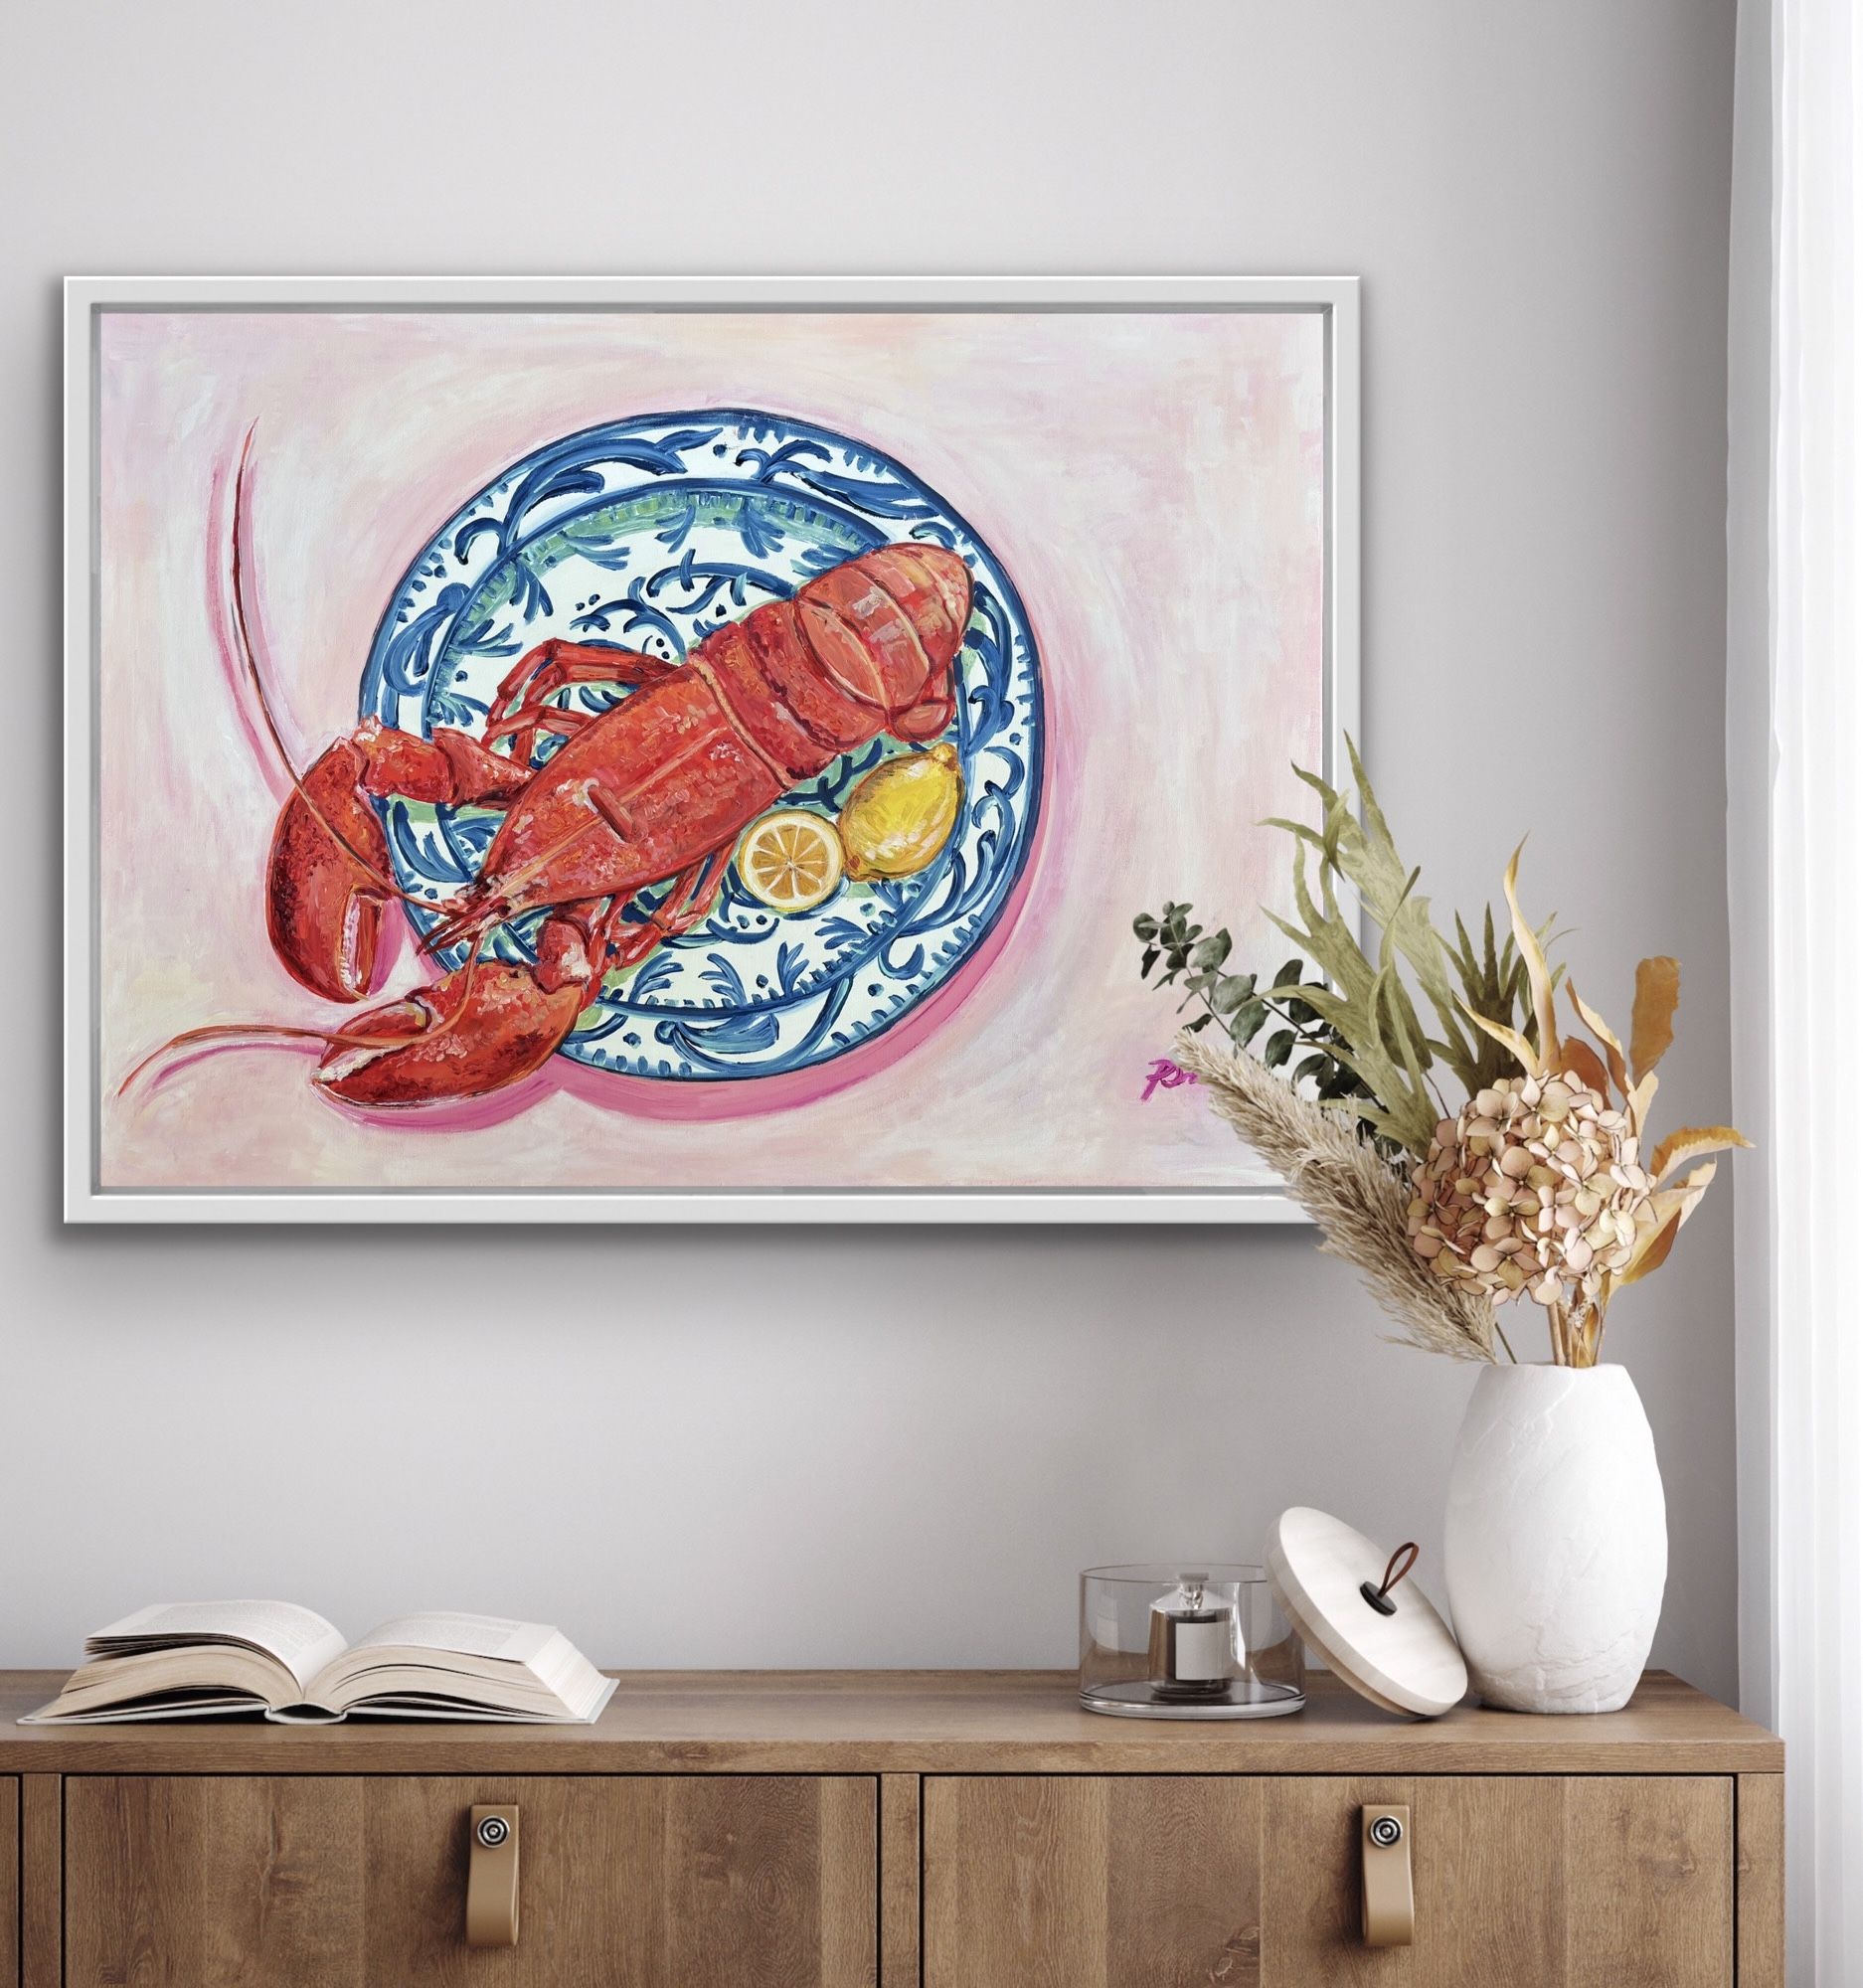 Large Lobster on Blue & White Plate by Pippa Smith - Secondary Image